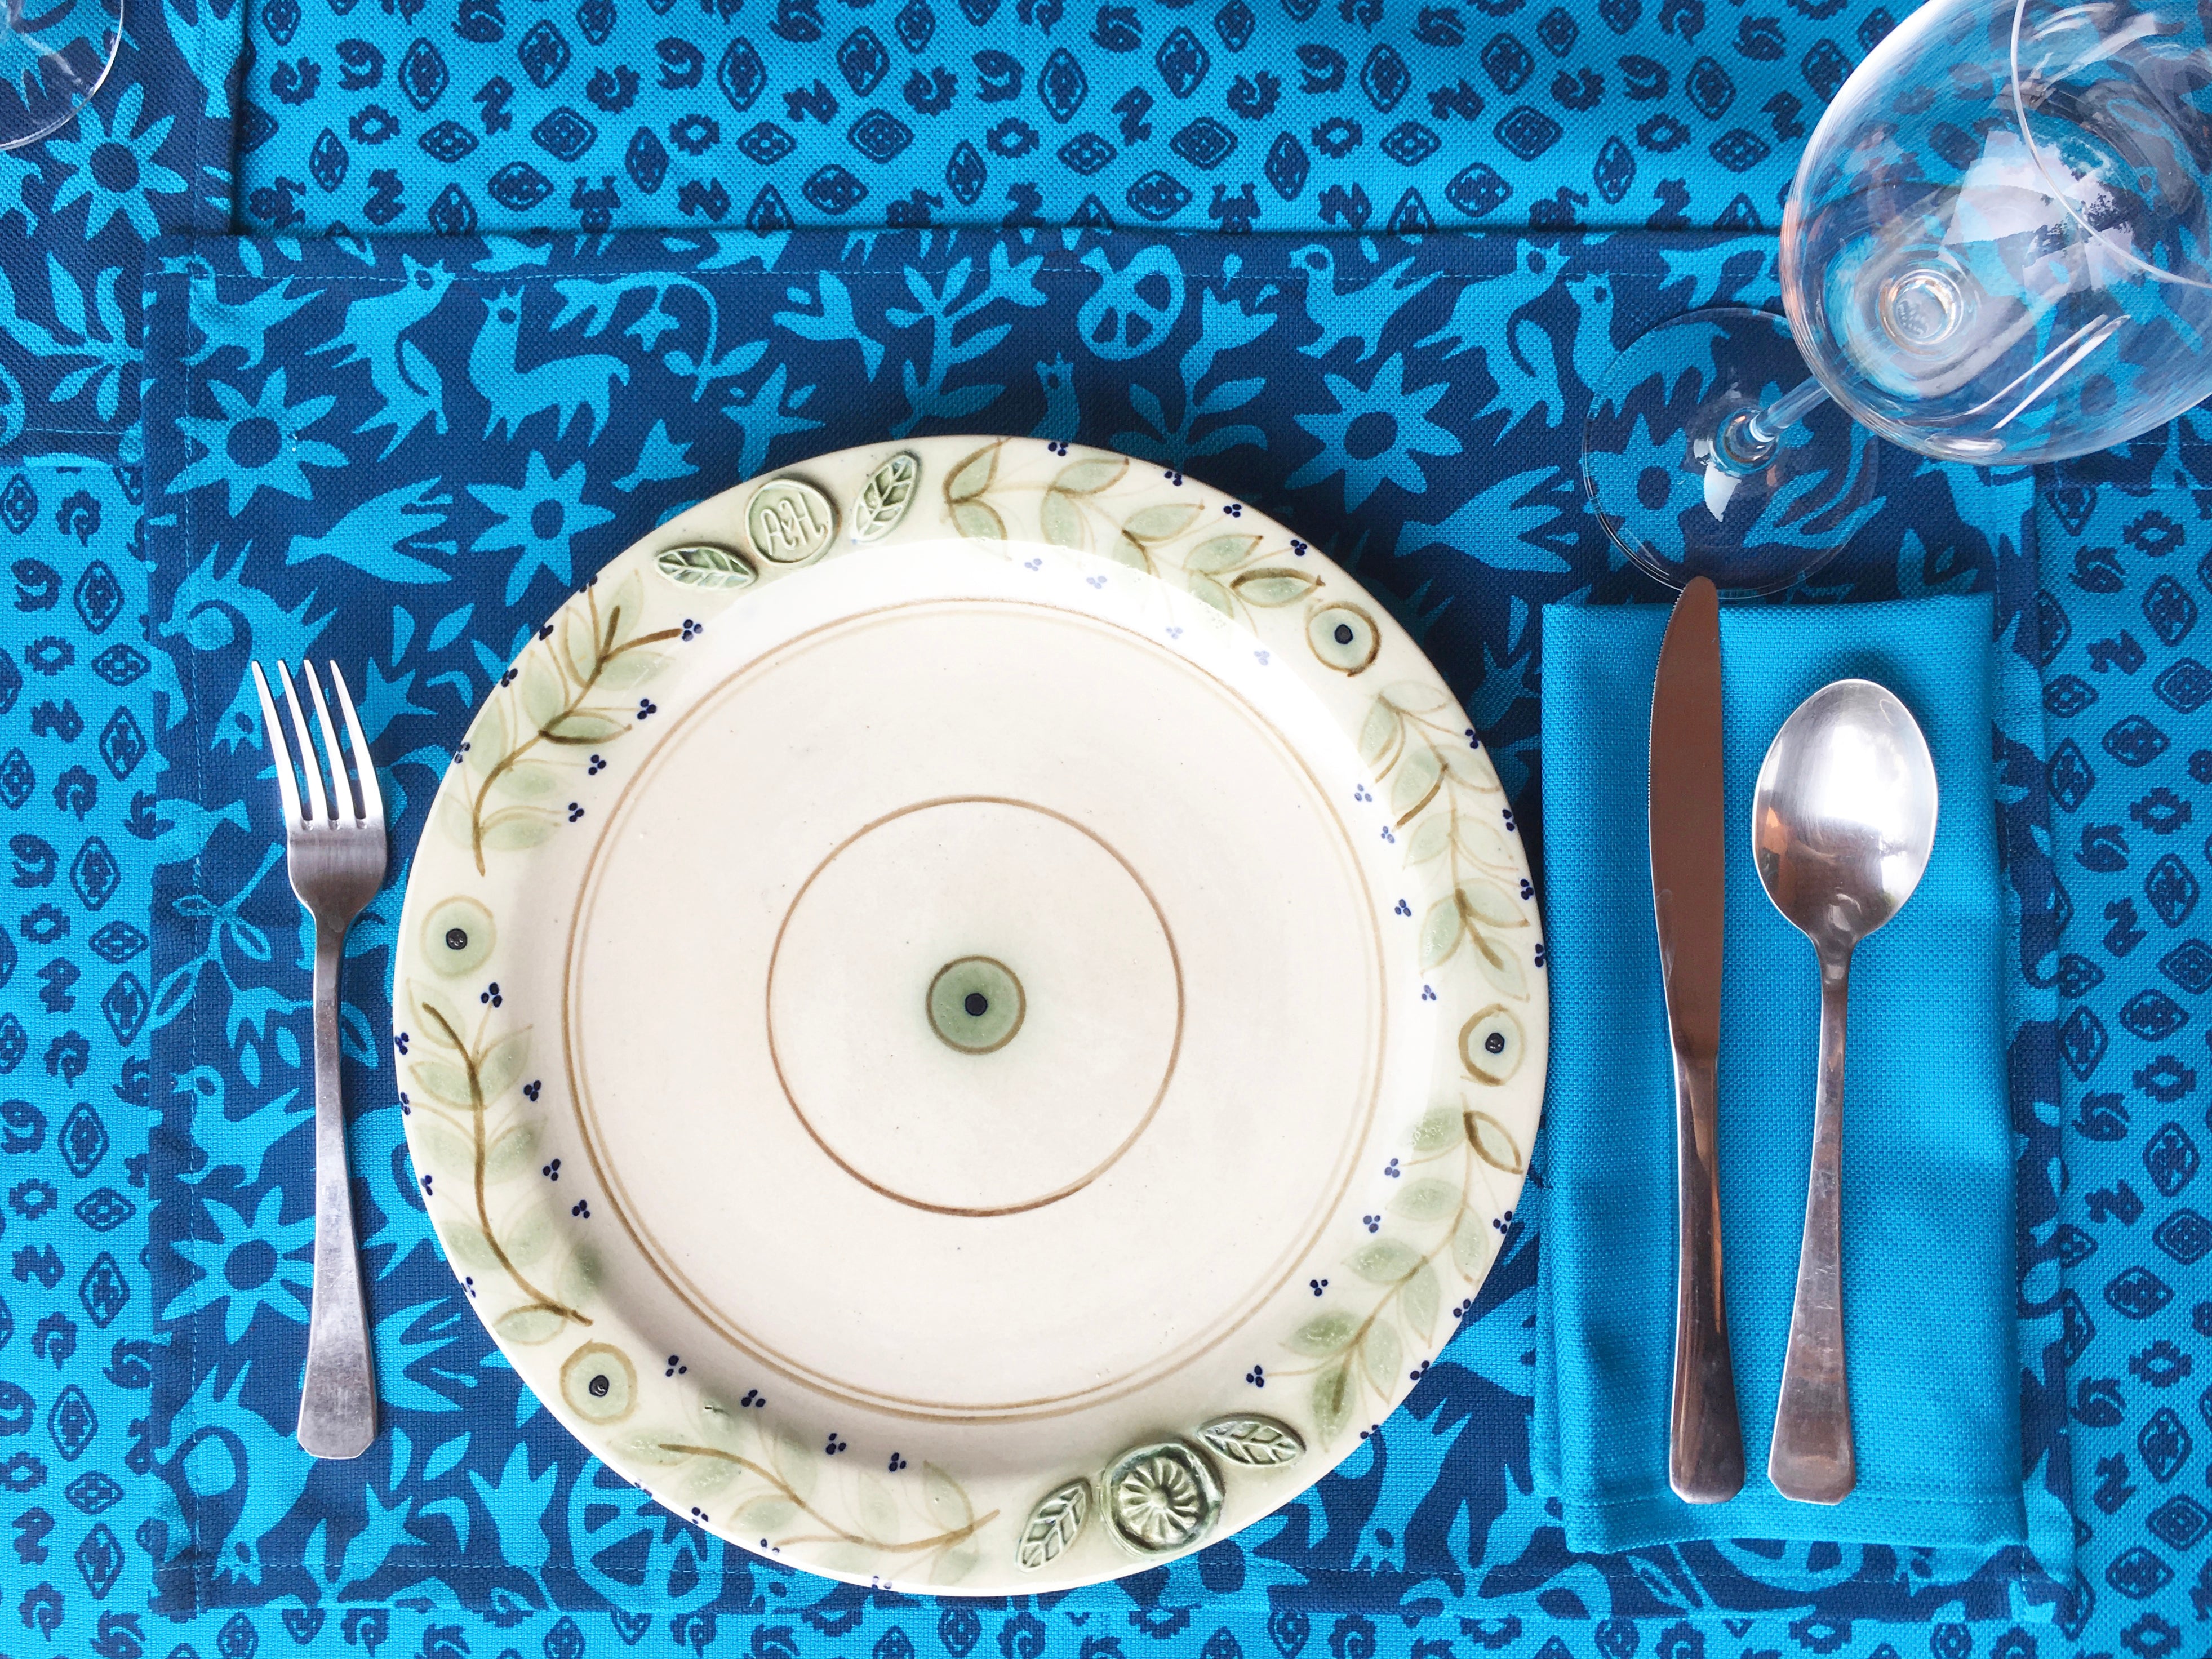 Set of Four Placemats - Pasto Print Turquoise